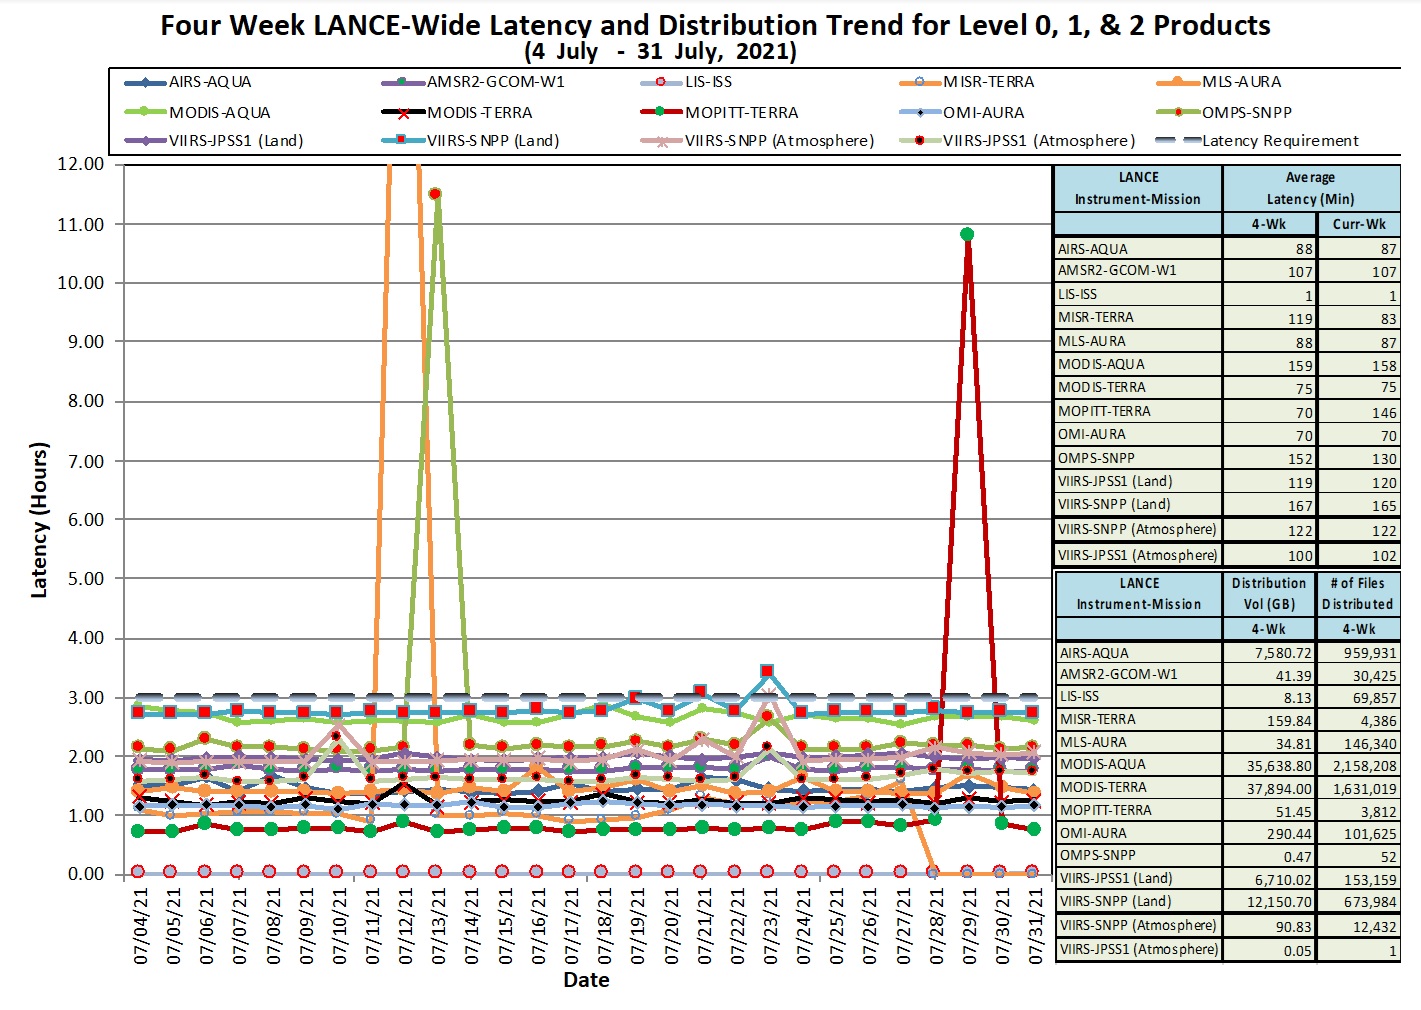 Line graph and table showing LANCE metrics and latency as of 8-5-21